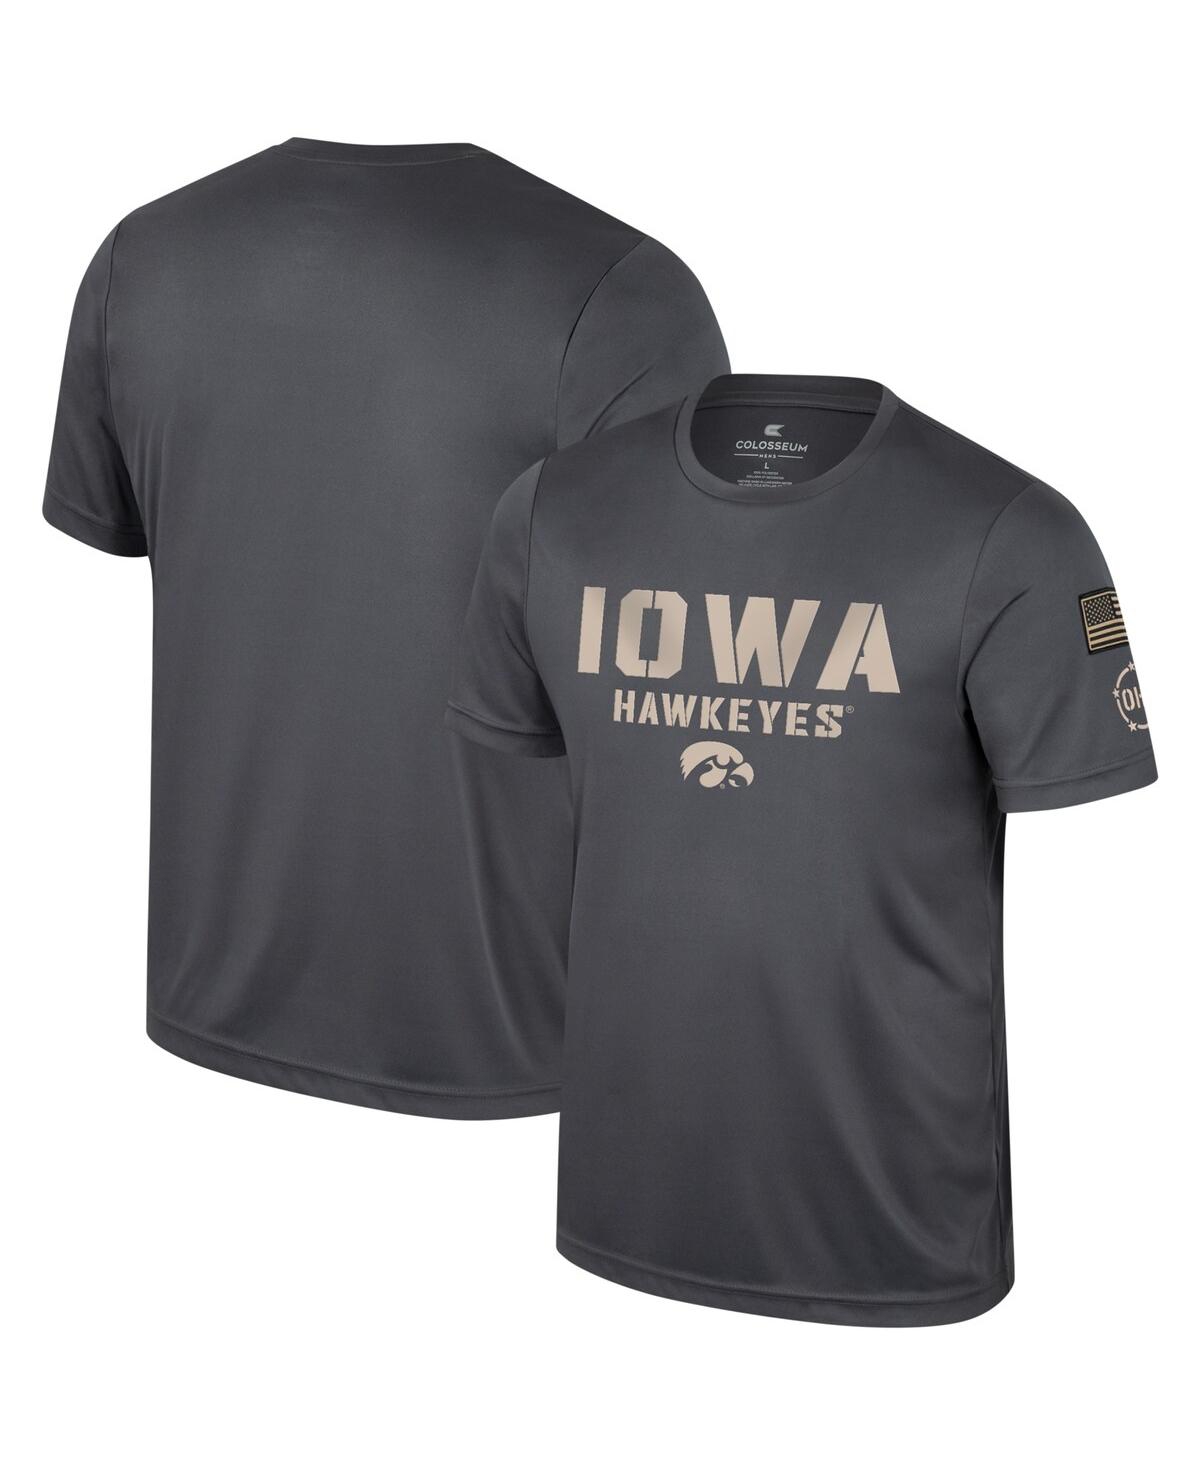 Shop Colosseum Men's  Charcoal Iowa Hawkeyes Oht Military-inspired Appreciation T-shirt